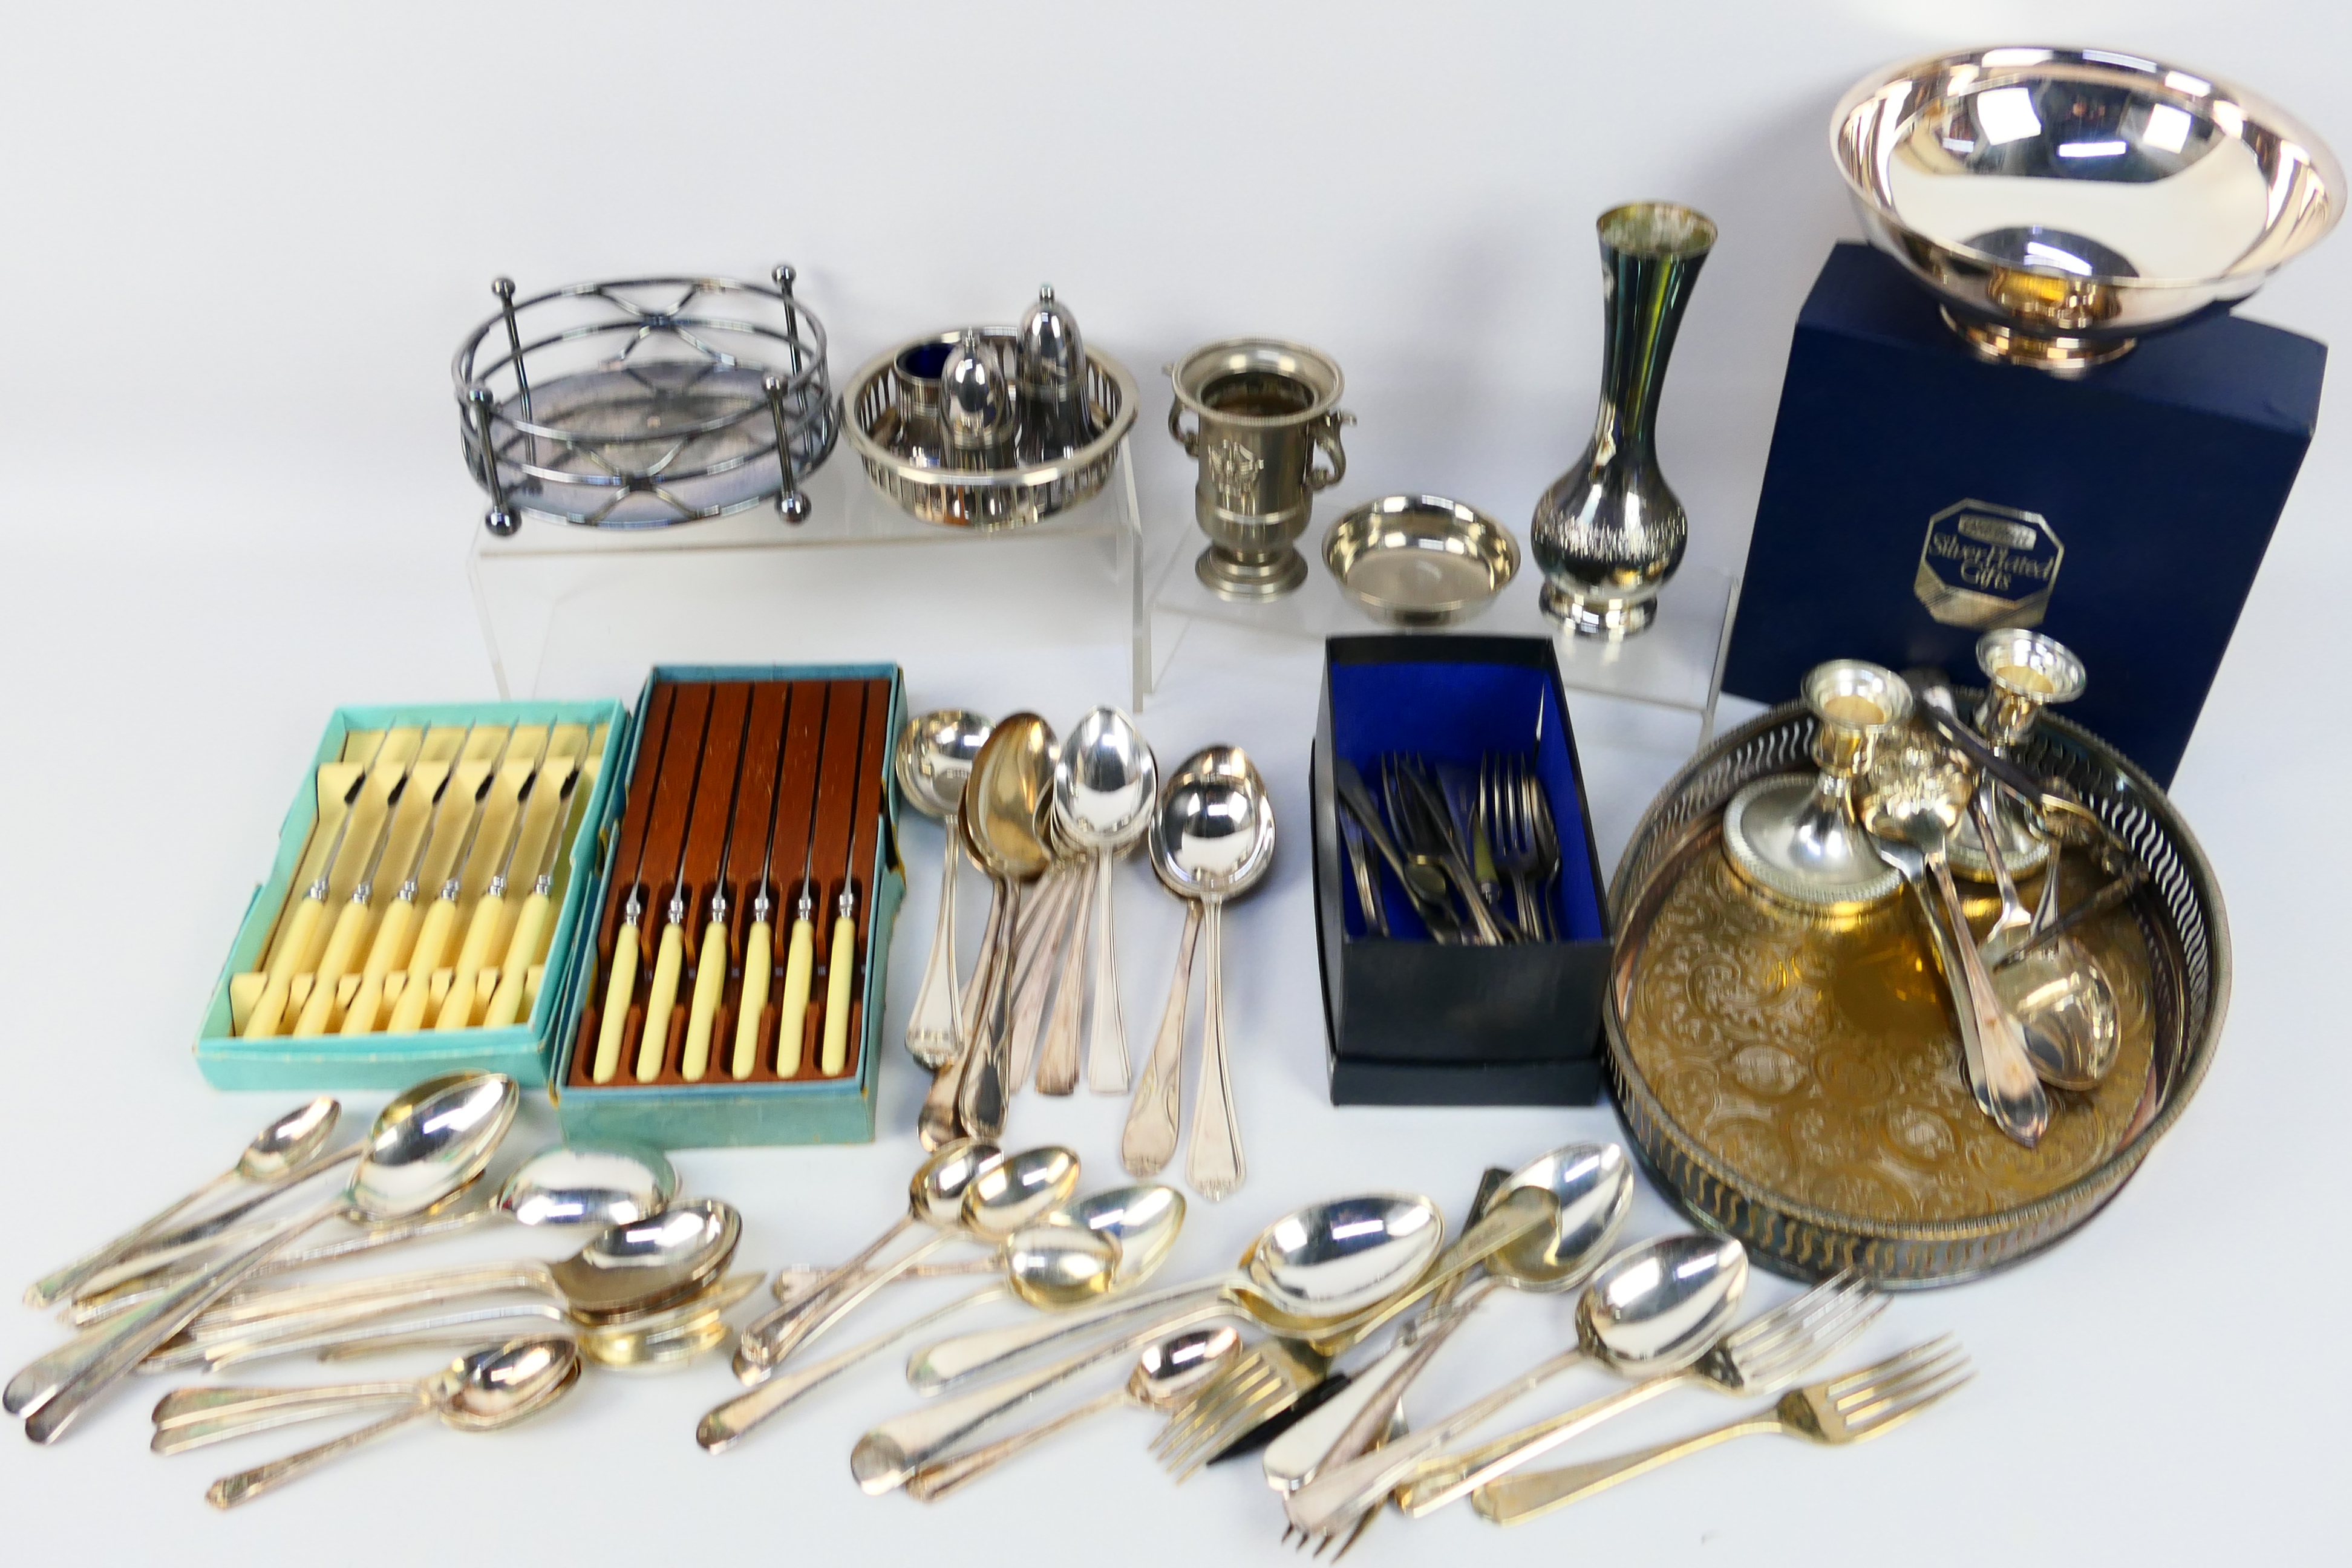 A collection of various plated ware, stainless and other including flatware.